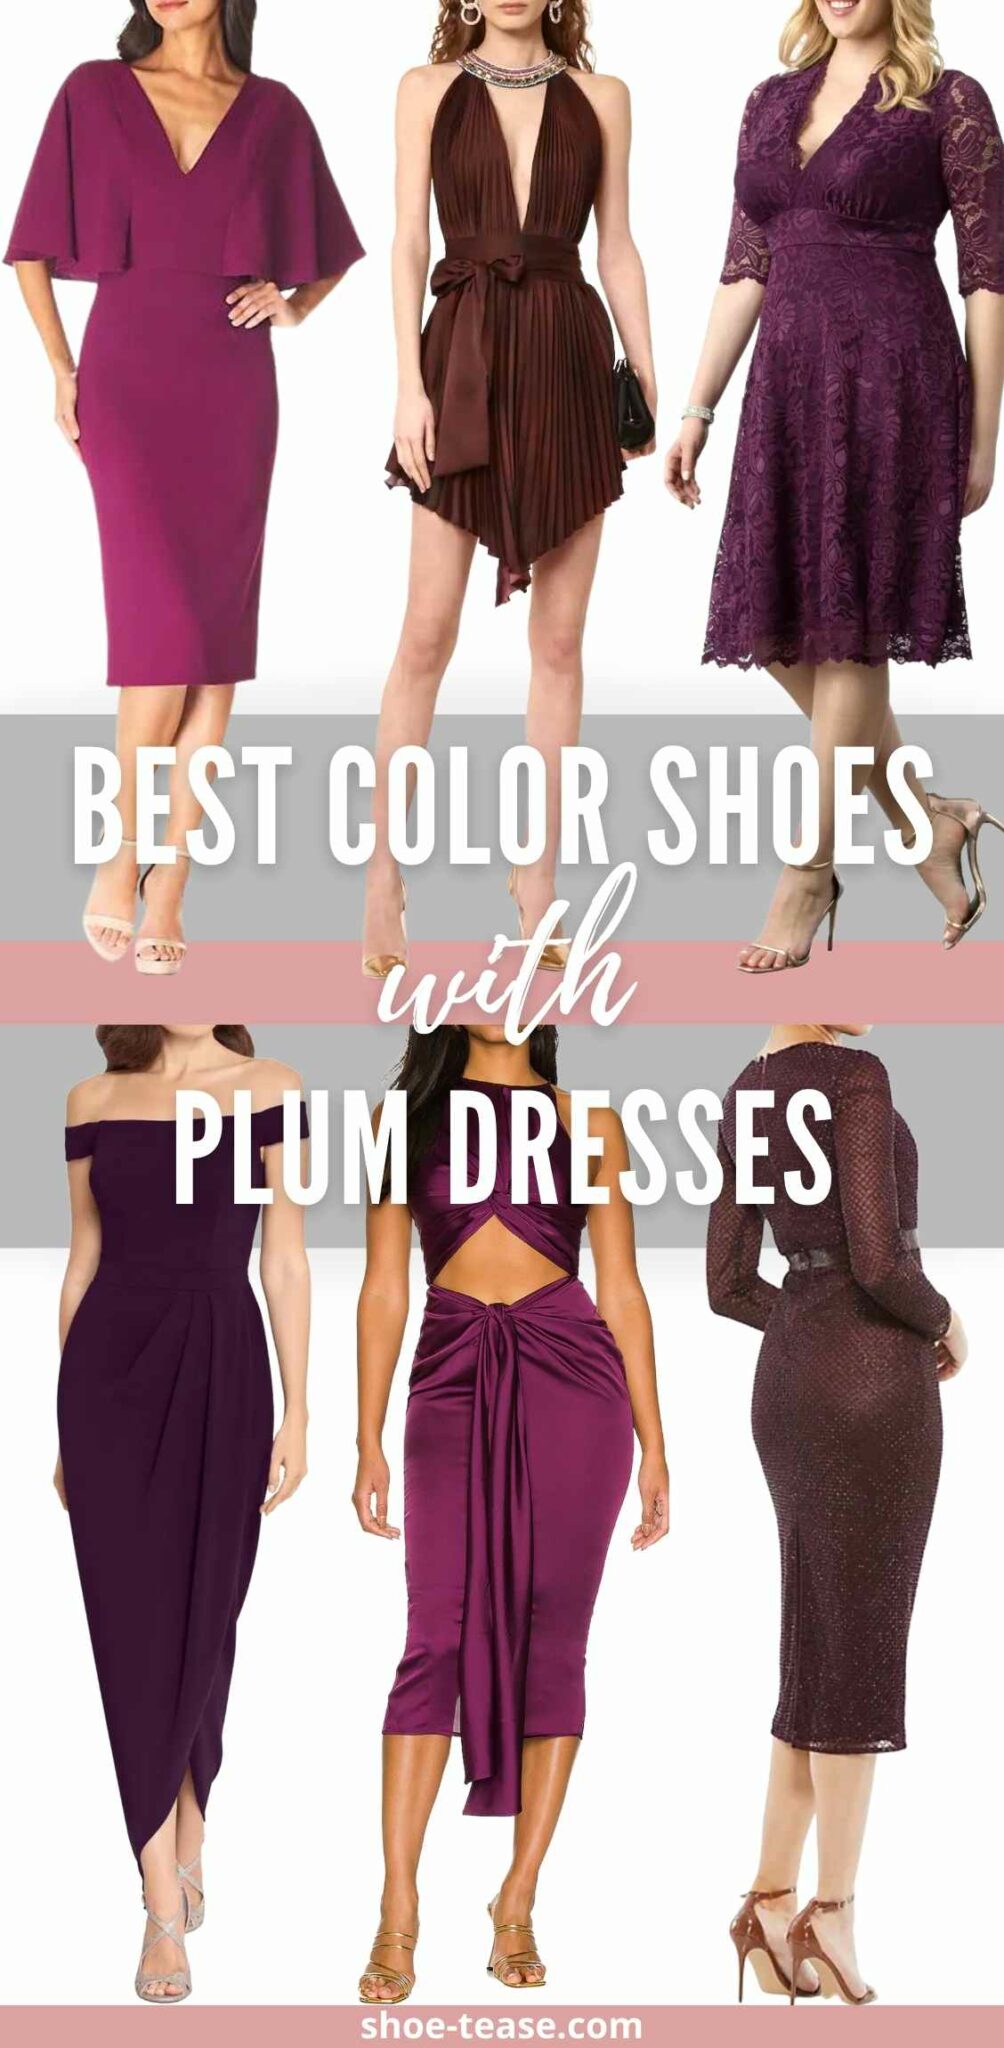 What Color Shoes to Wear with Plum Dress Outfits - 9 Shoes for Plum Dresses